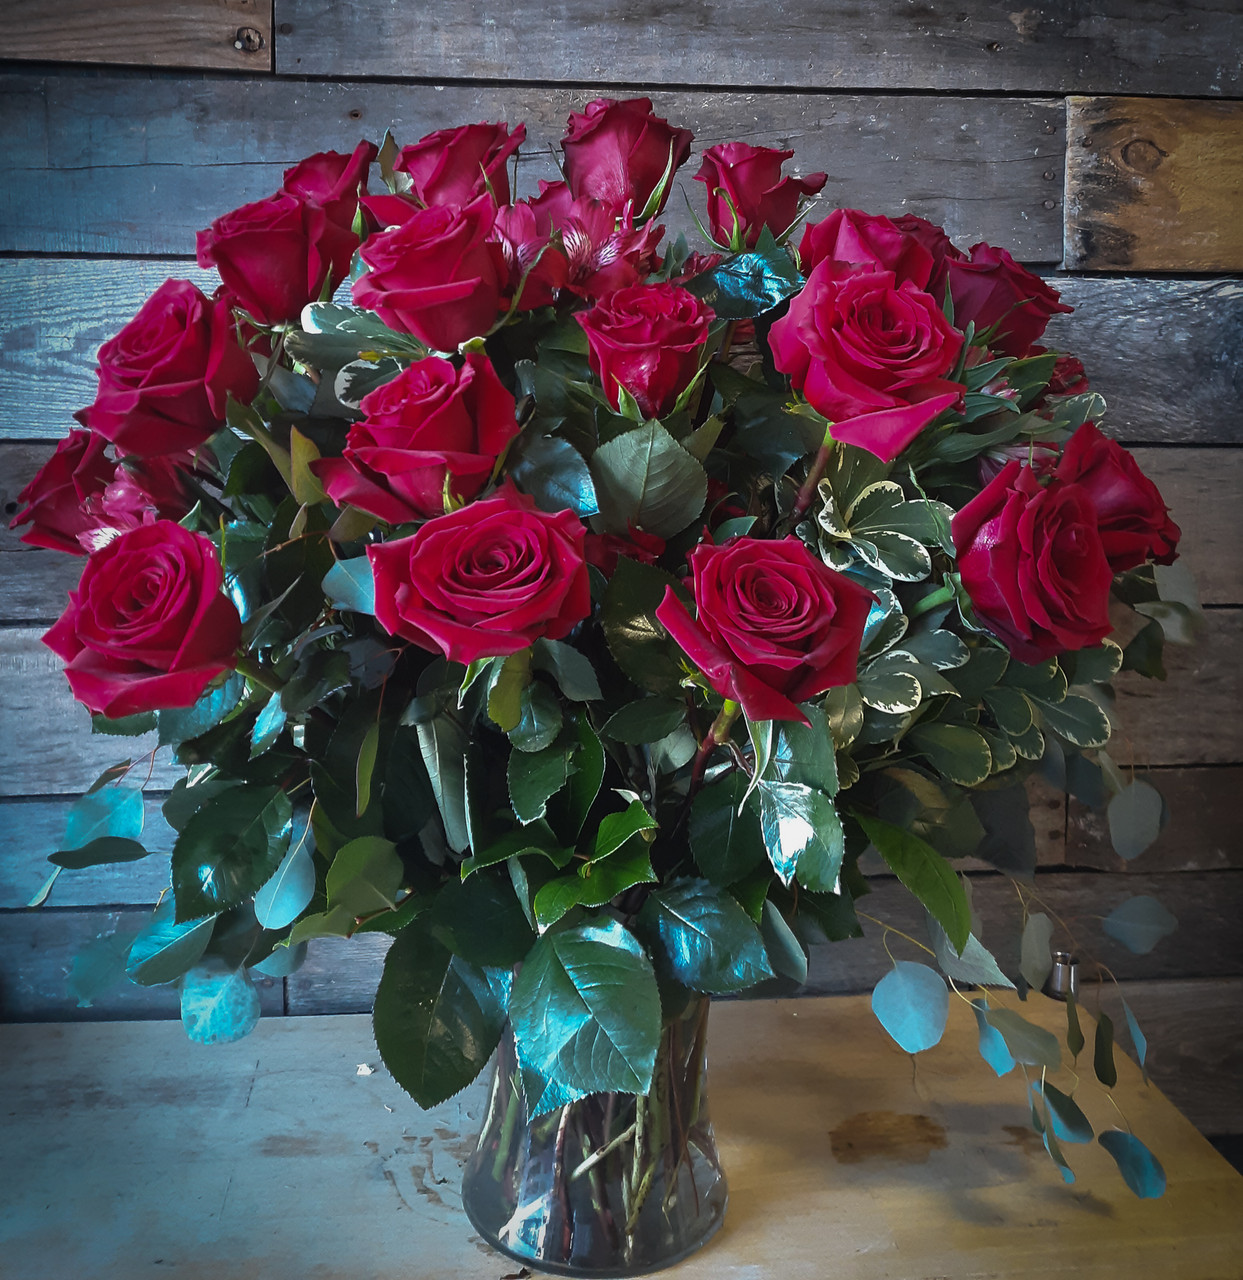 https://cdn11.bigcommerce.com/s-oqdn6h3/images/stencil/1280x1280/products/504/939/30_Longstem_Red_Roses__30316.1699119994.jpg?c=2